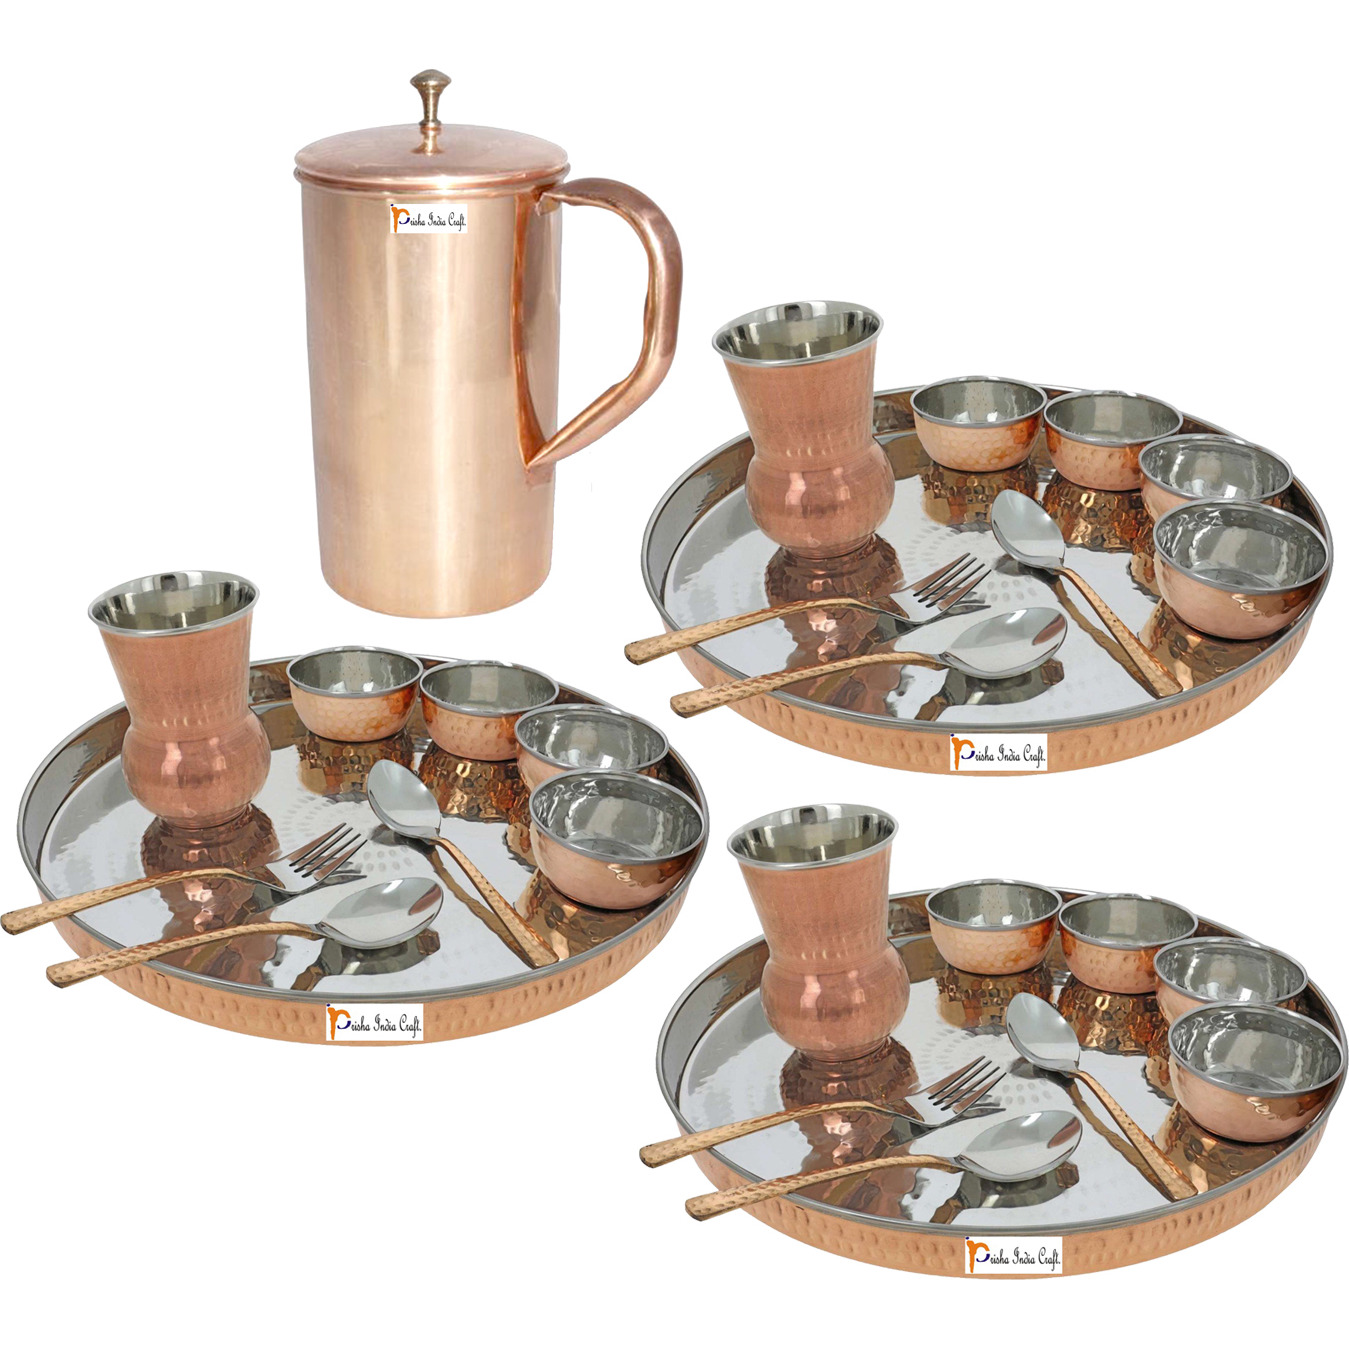 Prisha India Craft B. Set of 3 Dinnerware Traditional Stainless Steel Copper Dinner Set of Thali Plate, Bowls, Glass and Spoons, Dia 13  With 1 Pure Copper Classic Pitcher Jug - Christmas Gift